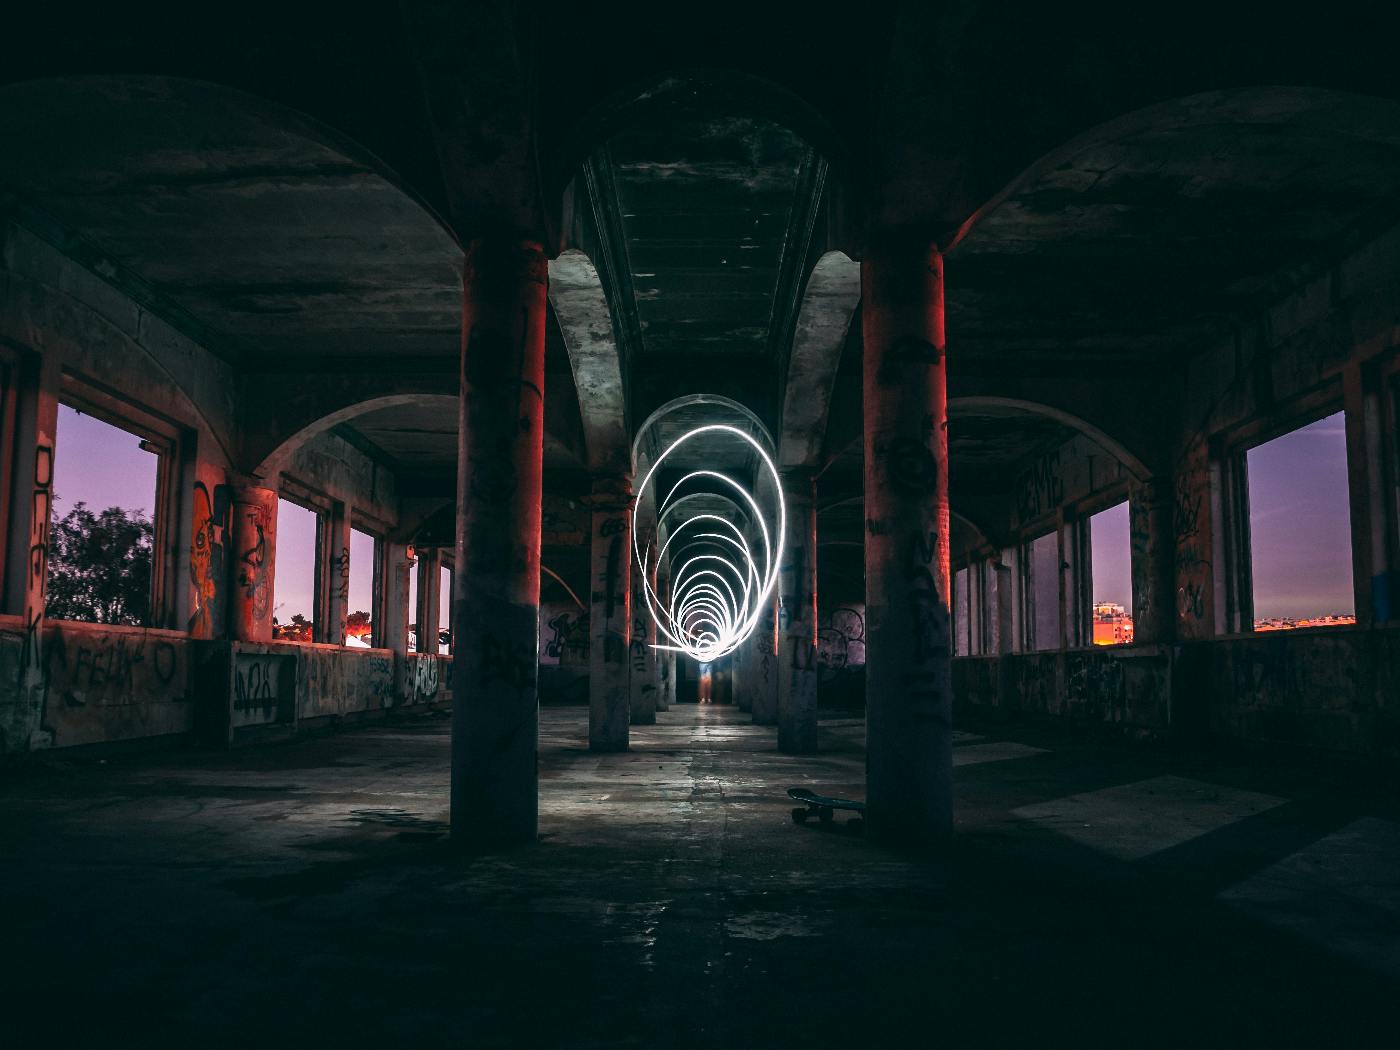 A long exposure of a tunnel in the middle of a building